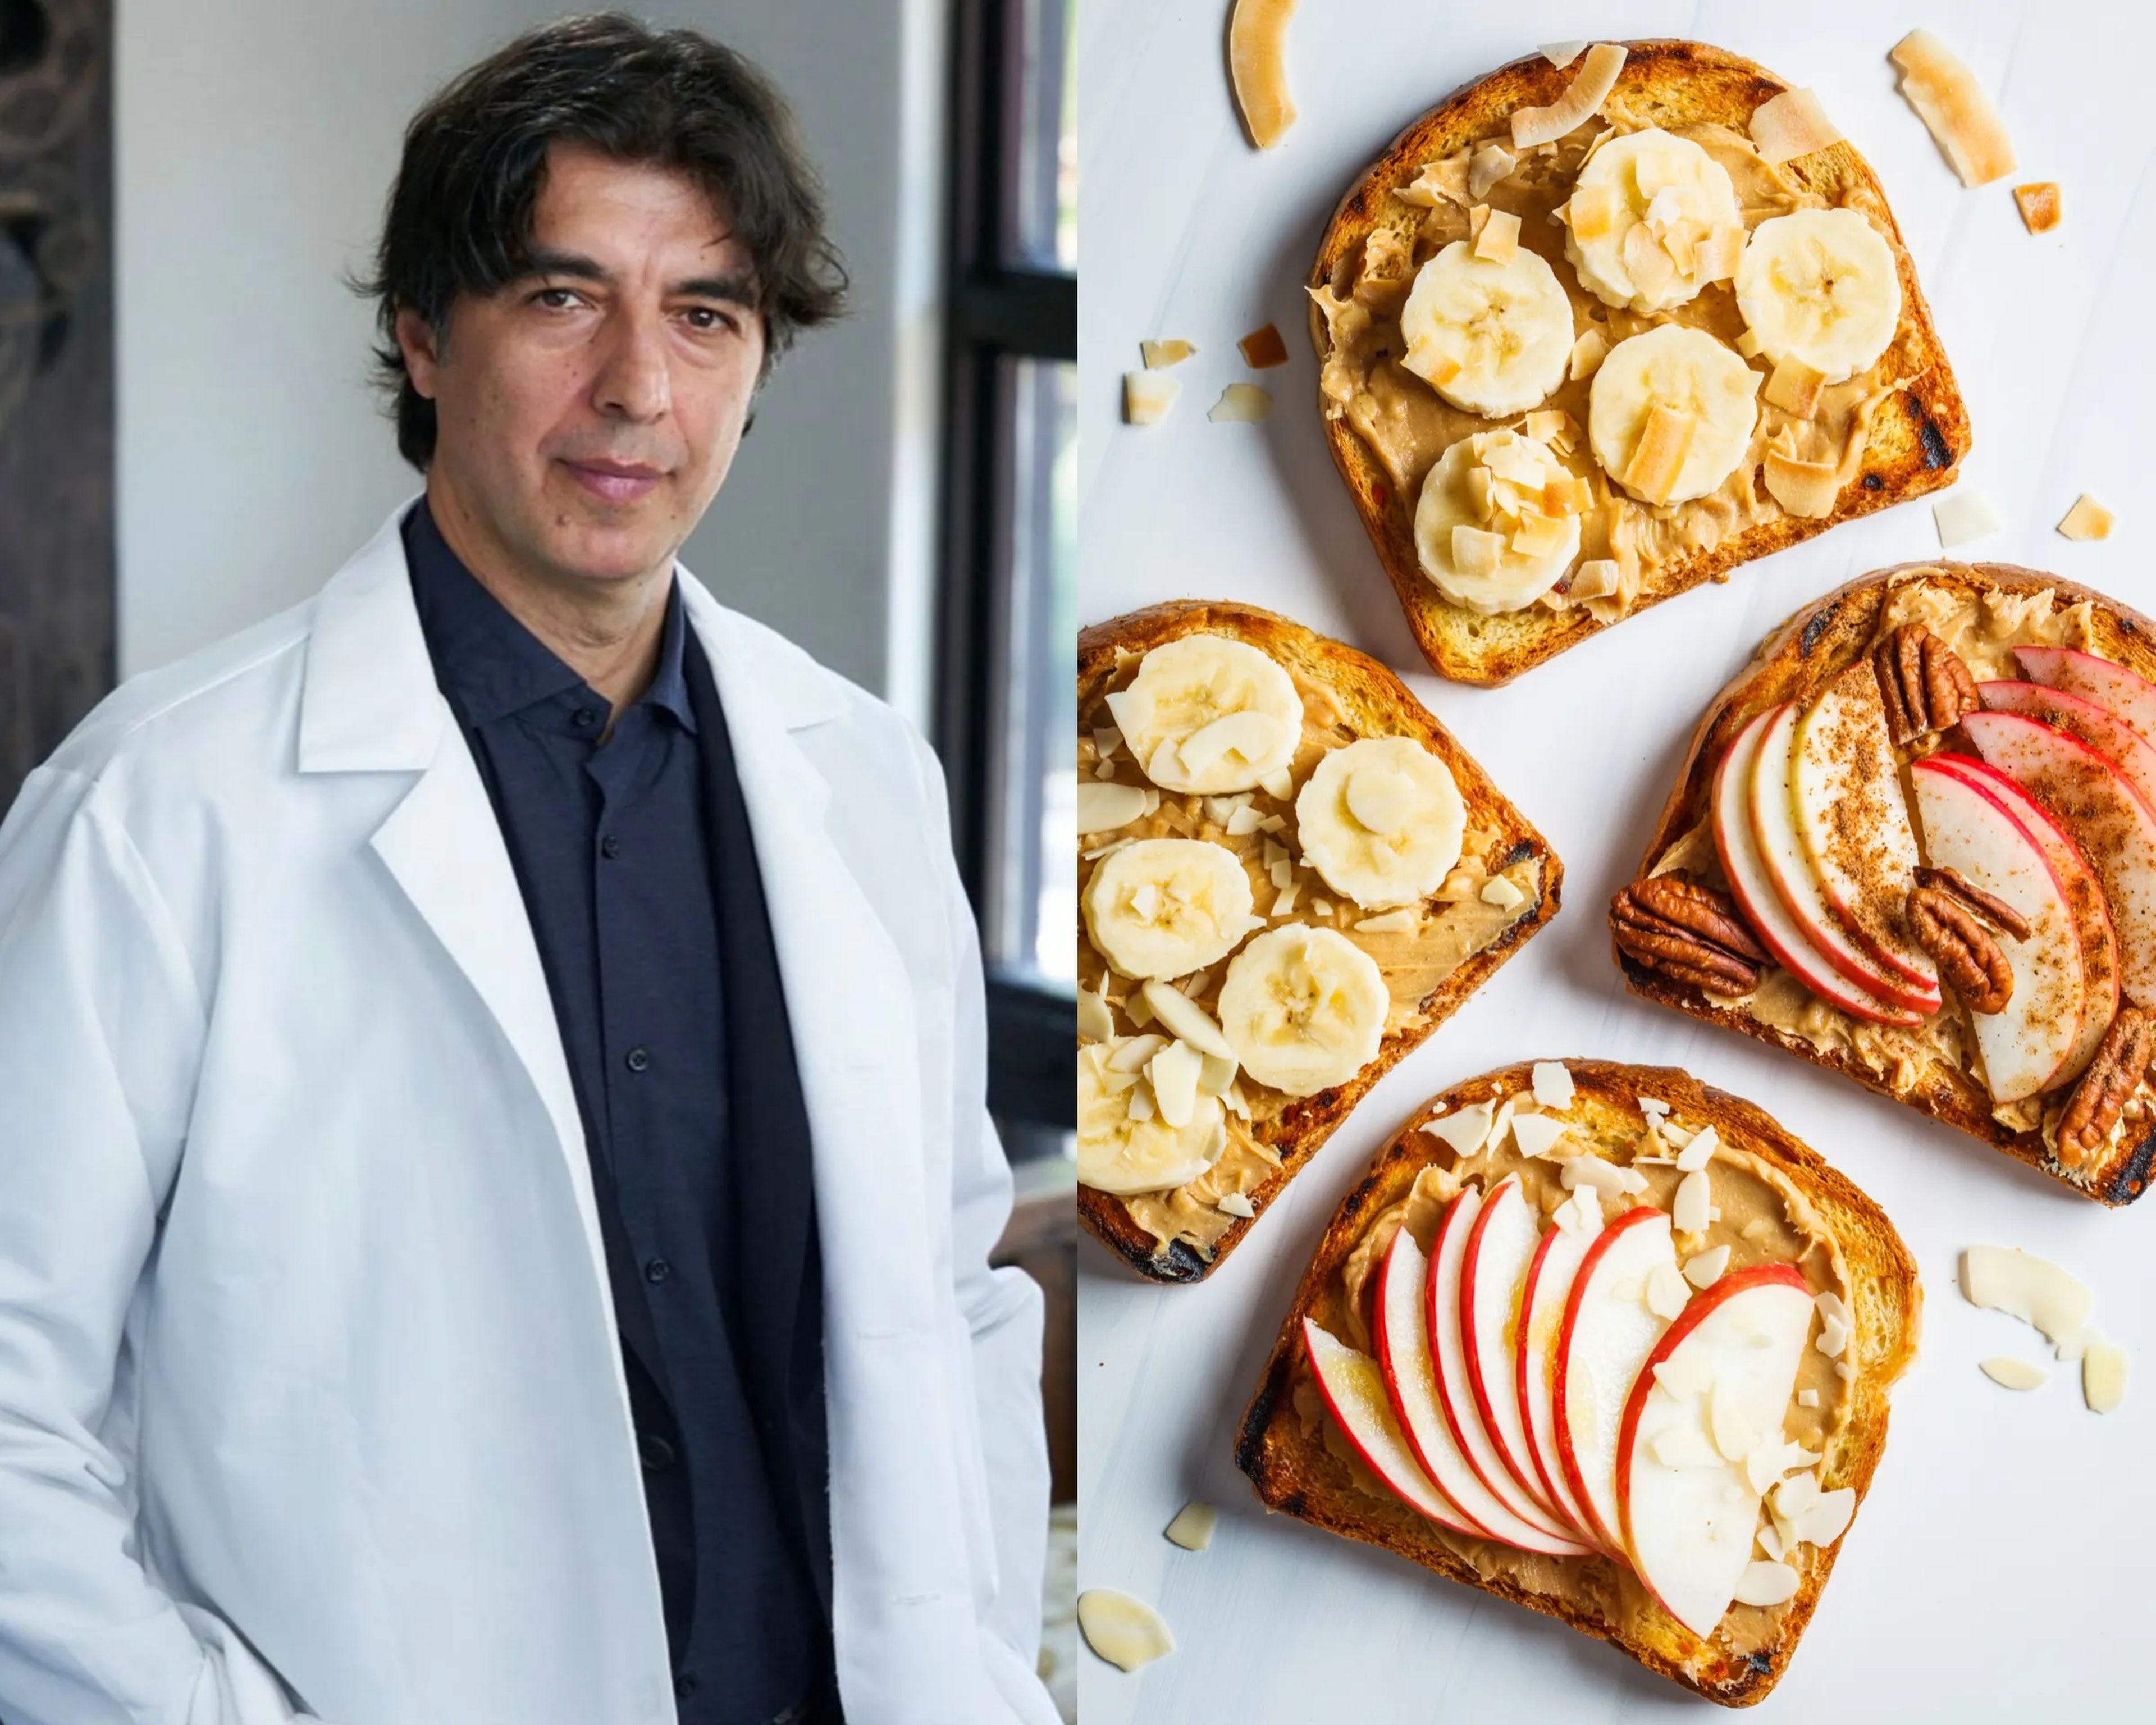 Valter Longo and some nut butter toast with bananas and apples